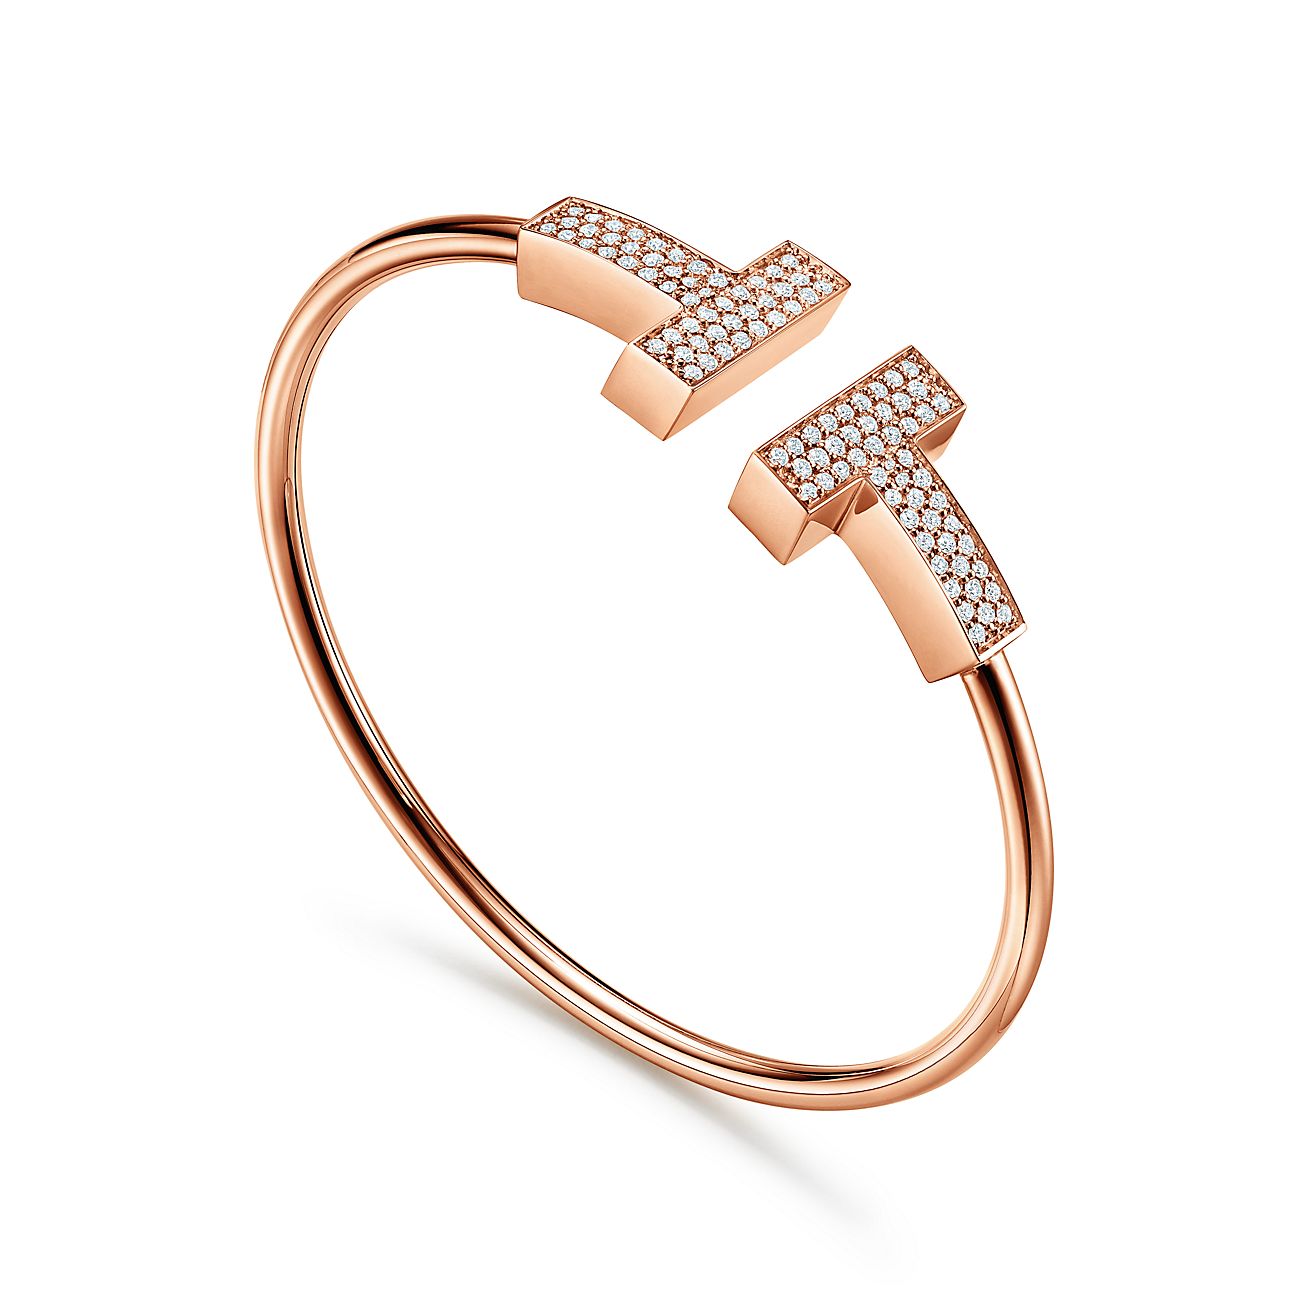 Tiffany T Wire Bracelet in Rose Gold with Diamonds  Tiffany  Co